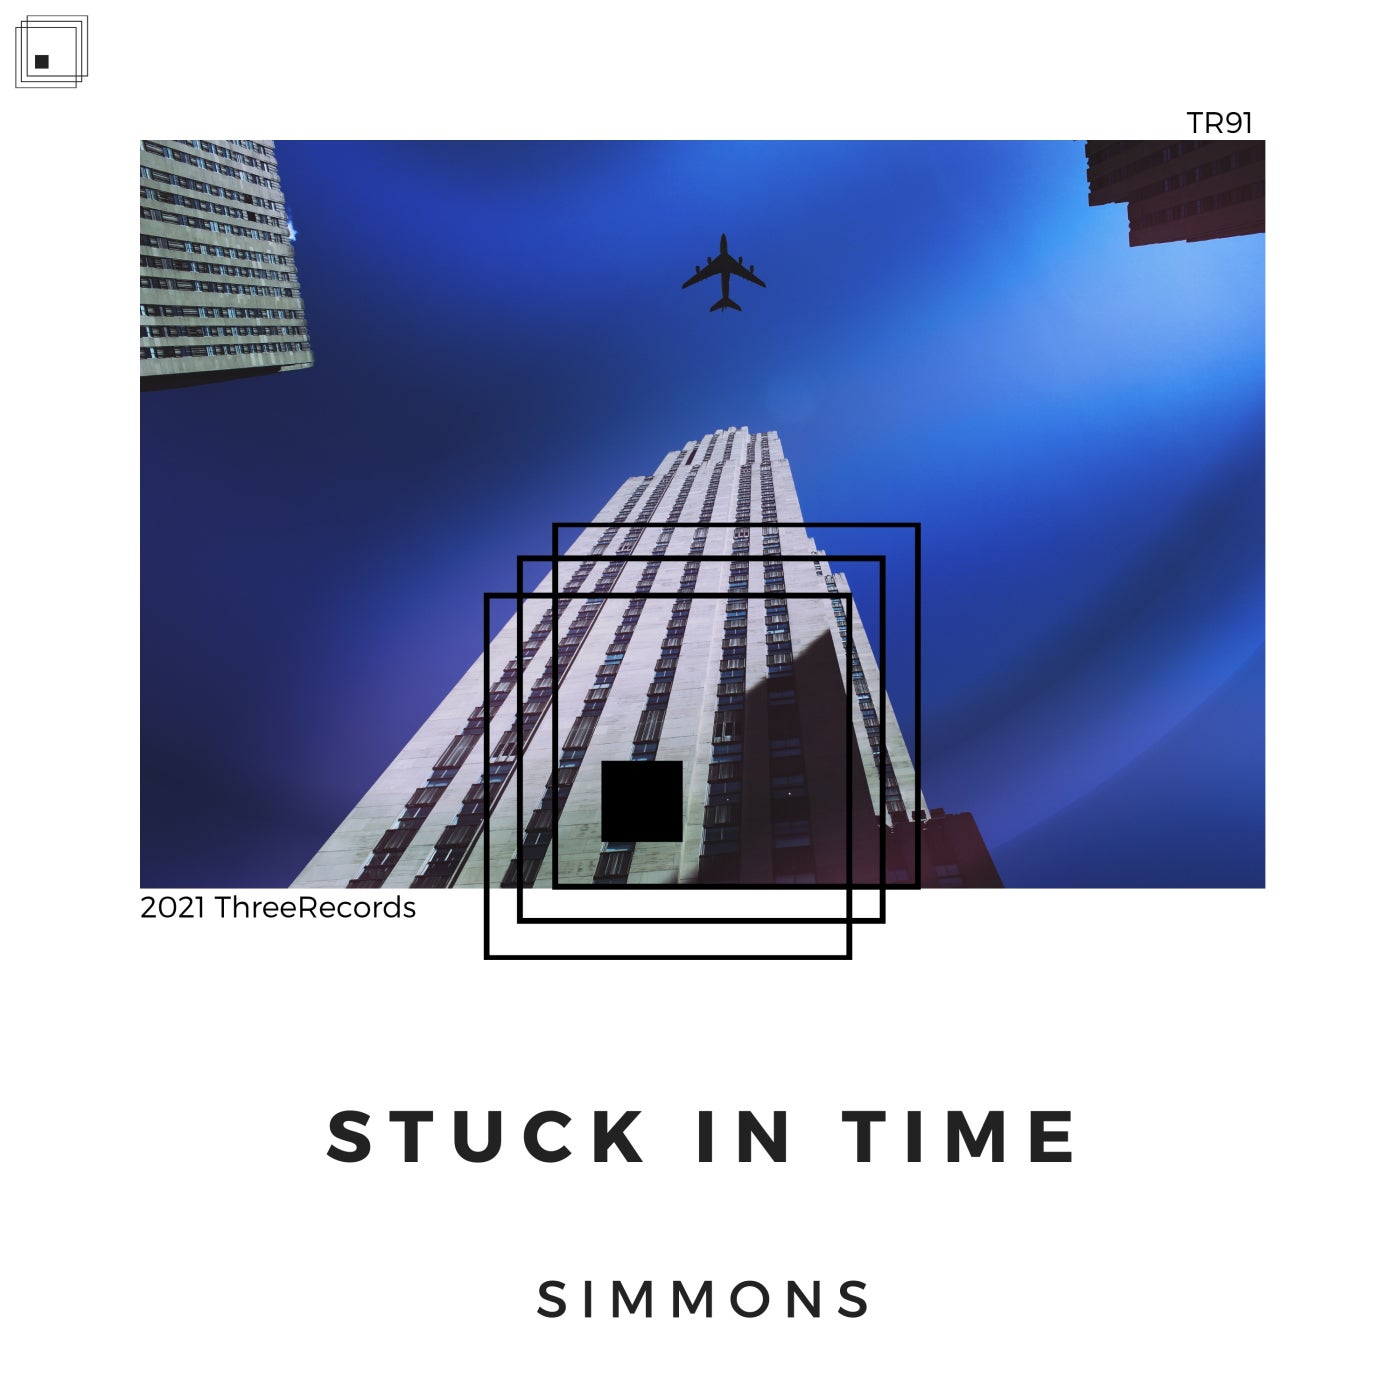 Simmons - Stuck in Time [TR91]